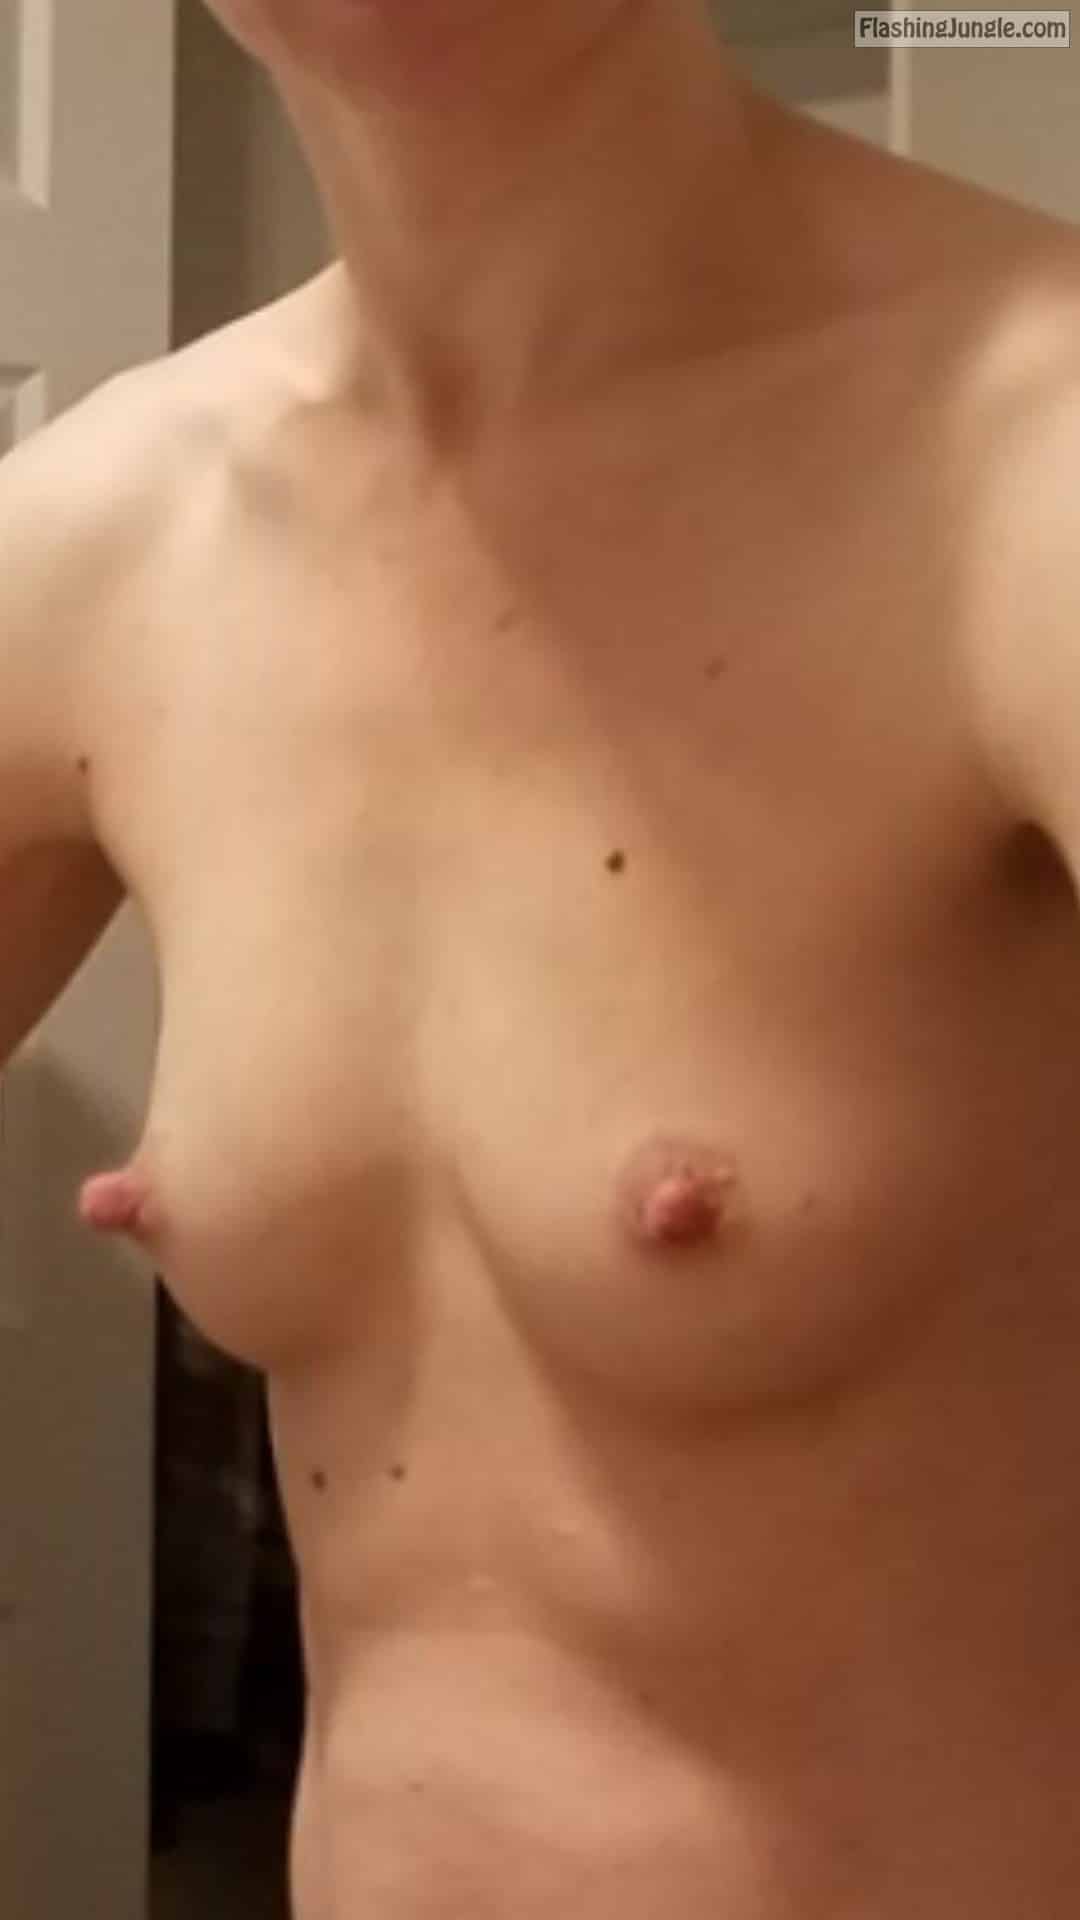 Real Amateurs Boobs Flash Pics  : small tits eraser nips Small tits hard erected nipples available for sucking